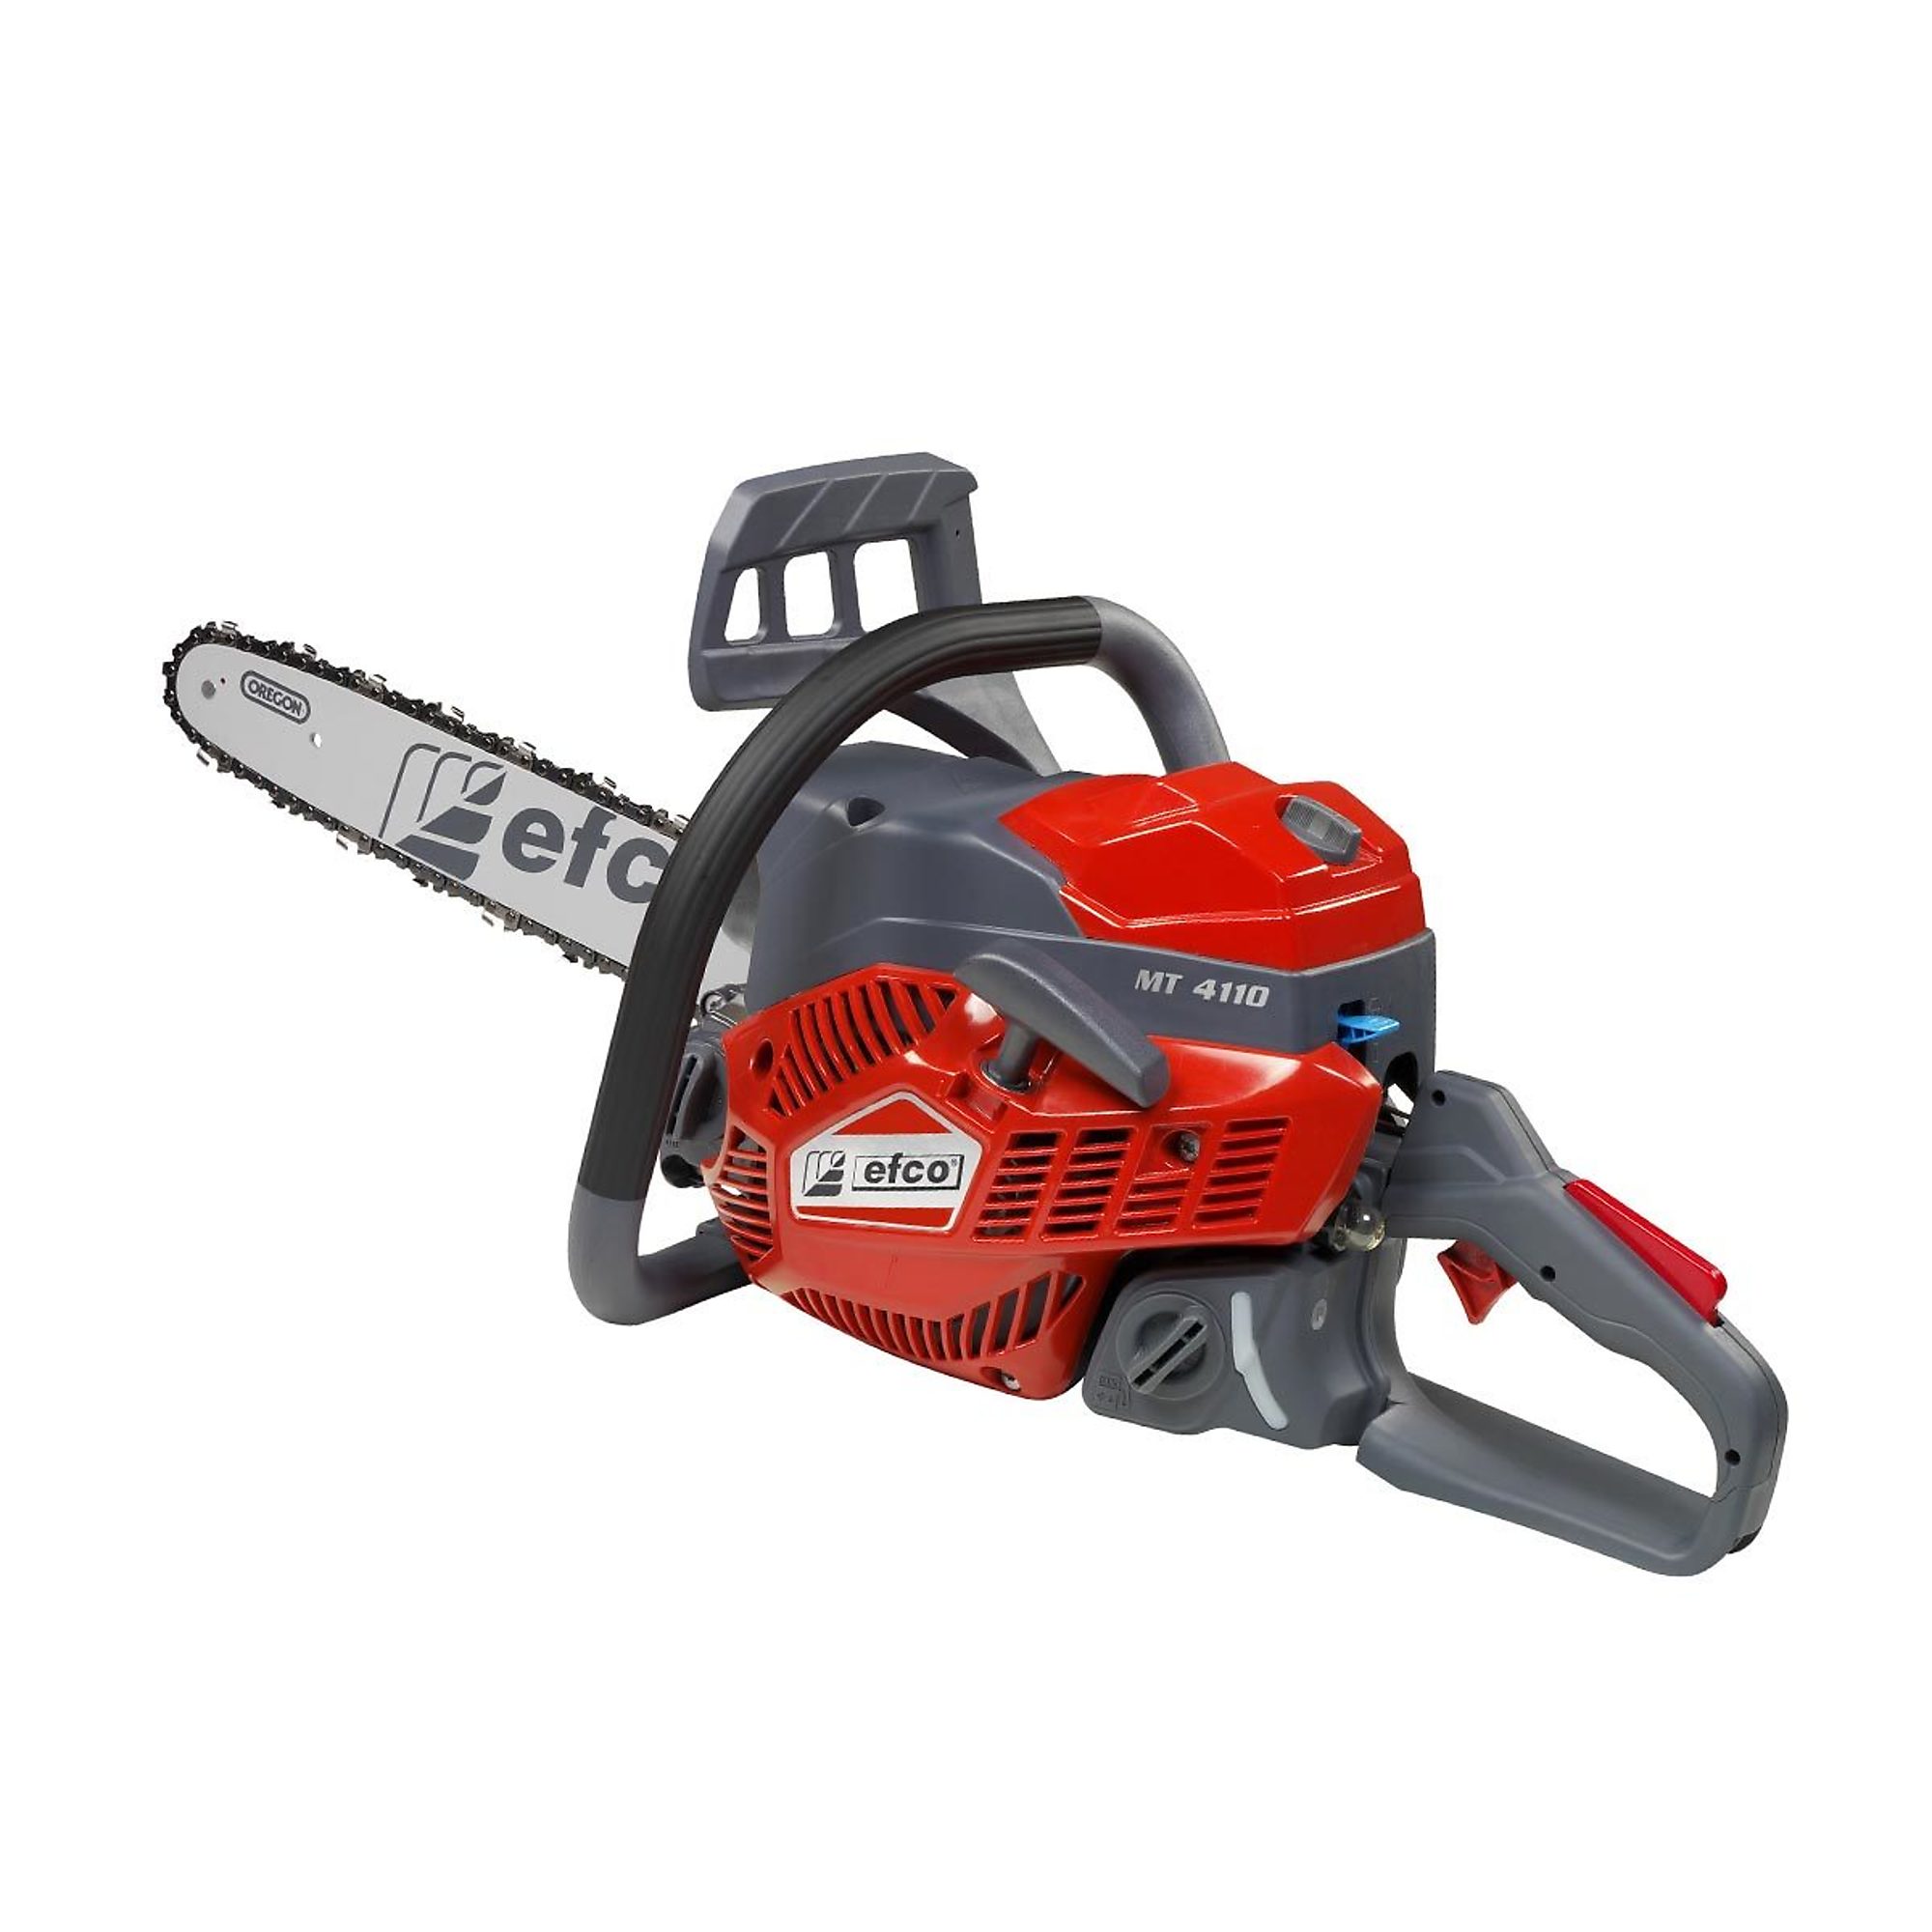 Efco, 16Inch MT-Series Compact Gas Chainsaw, Bar Length 16 in, Engine Displacement 39 cc, Model MT4110-16